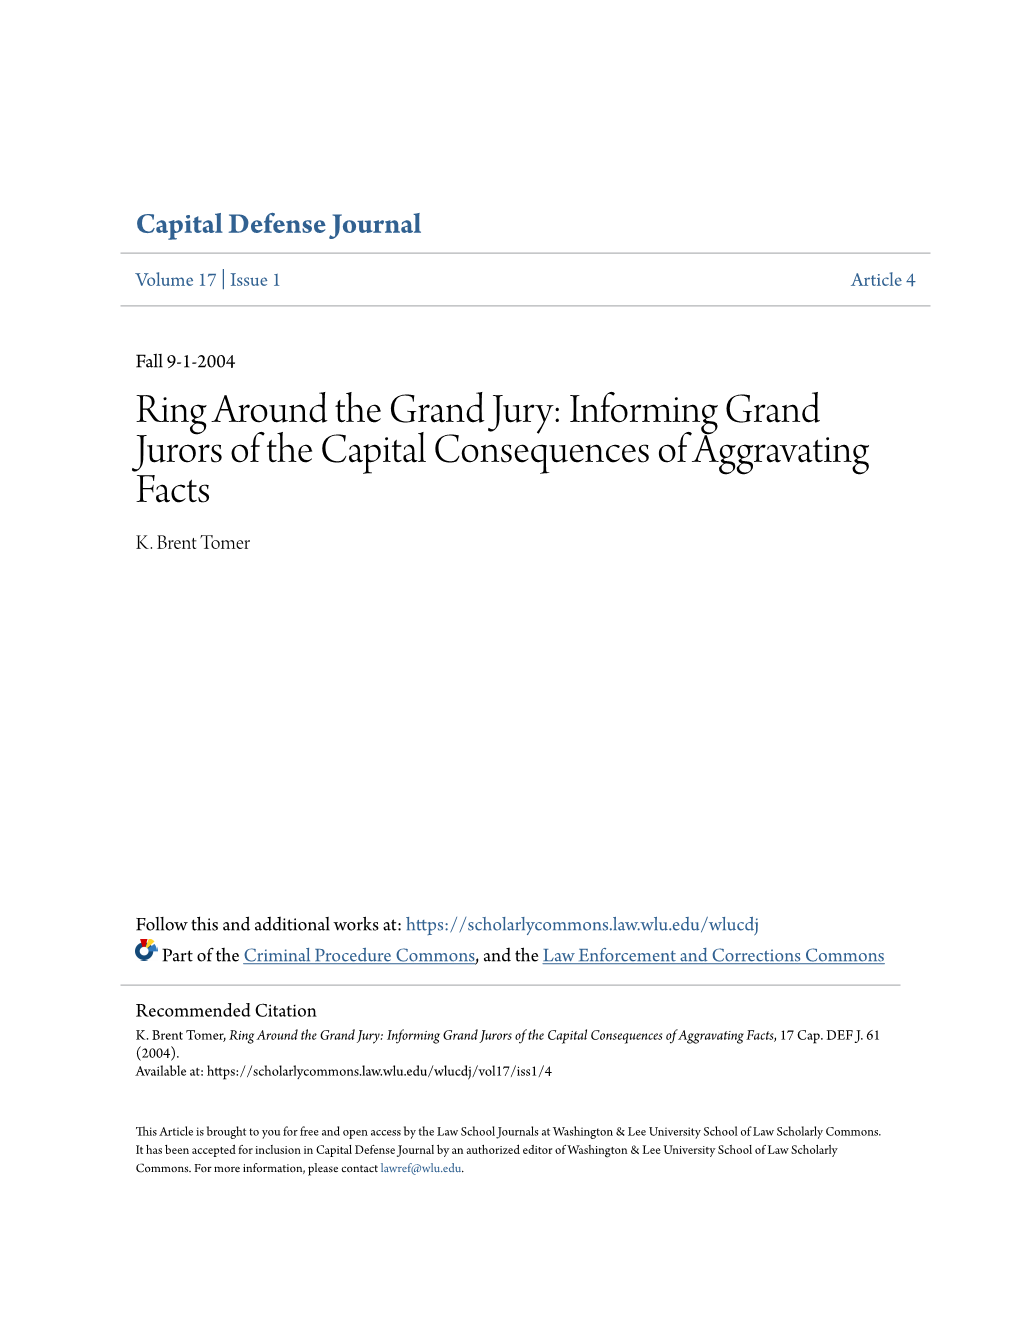 Ring Around the Grand Jury: Informing Grand Jurors of the Capital Consequences of Aggravating Facts K